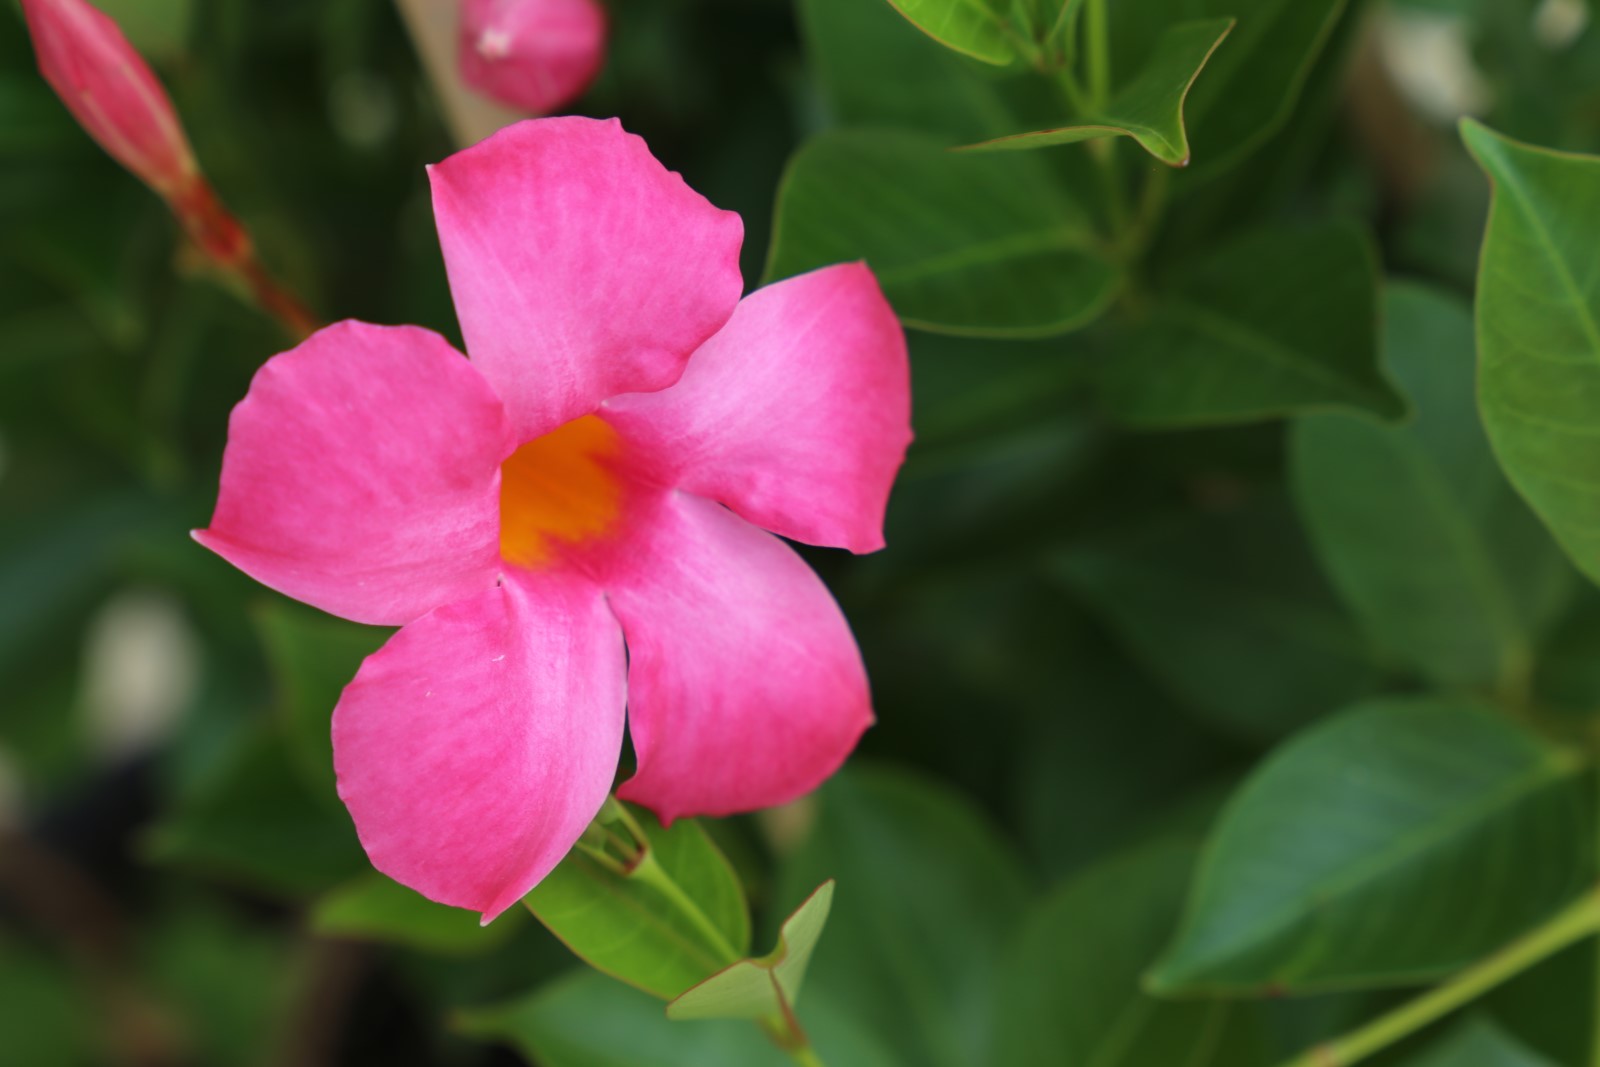 All Seasons Pink Mandevilla a climber with large flowers